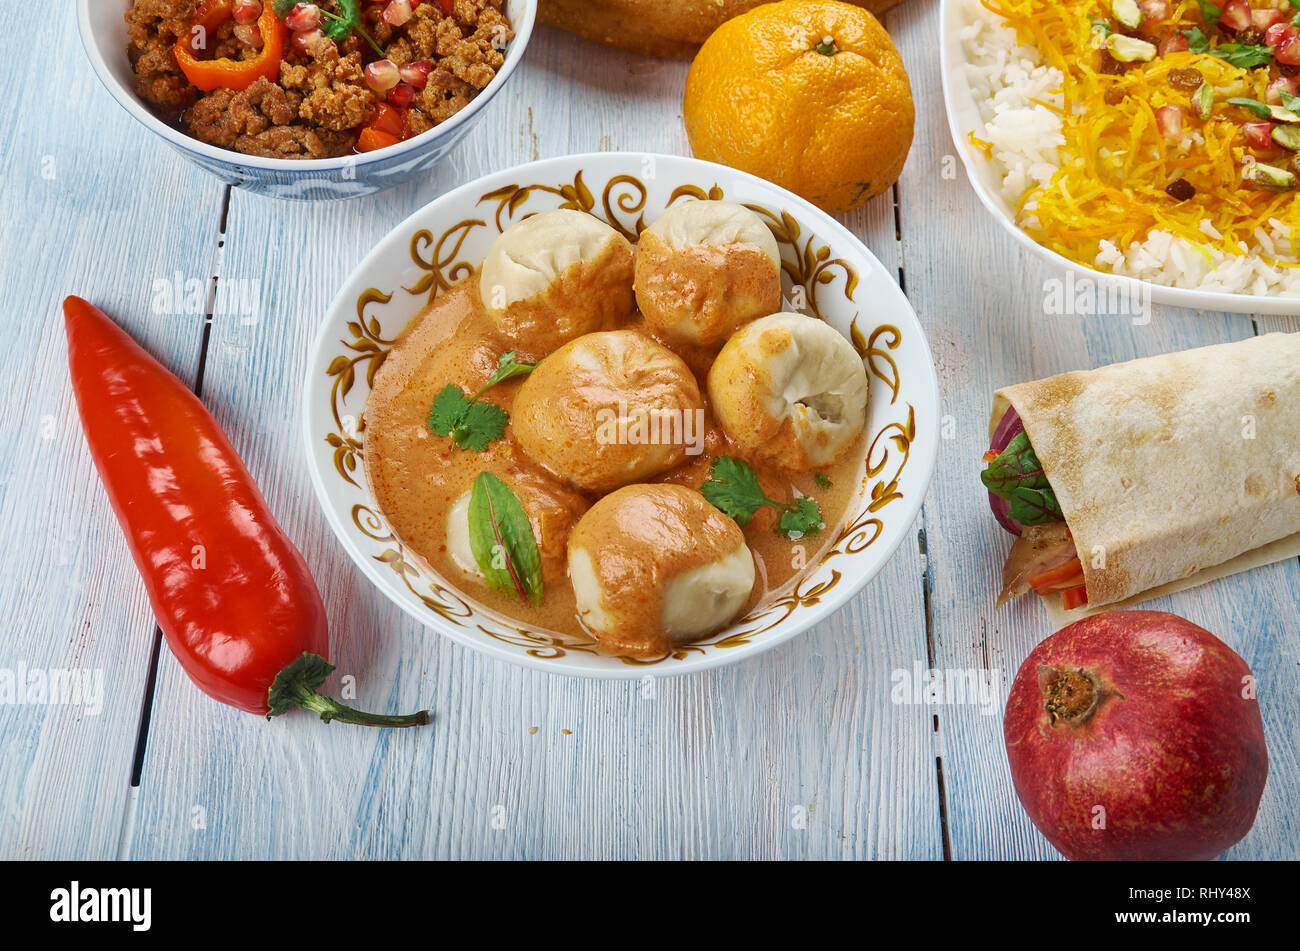 Mantu, Beef Dumplings. Afghani uisine, central Asia Traditional assorted dishes, Top view. Stock Photo